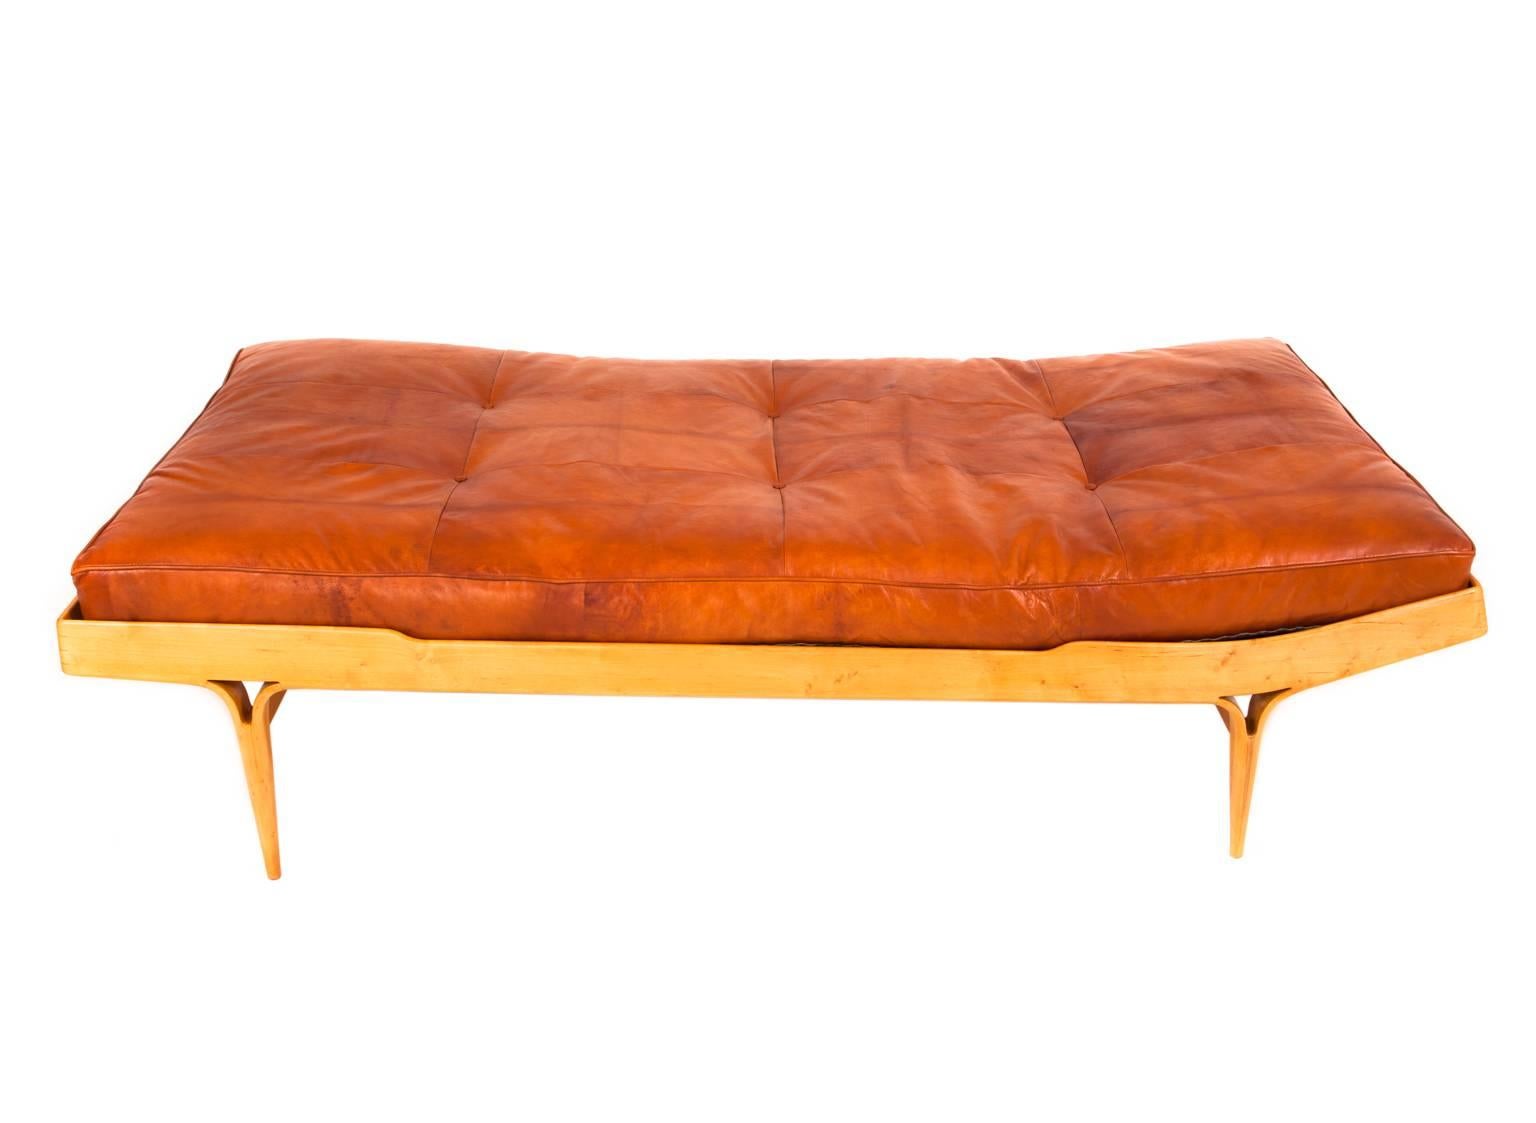 Bruno Mathsson, 

Berlin. 

A birch daybed with moulded tapering legs, loose matress with Niger leather. Stamped Firma Karl Mathsson

Made in Värnamo, Sweden, 1966 

 